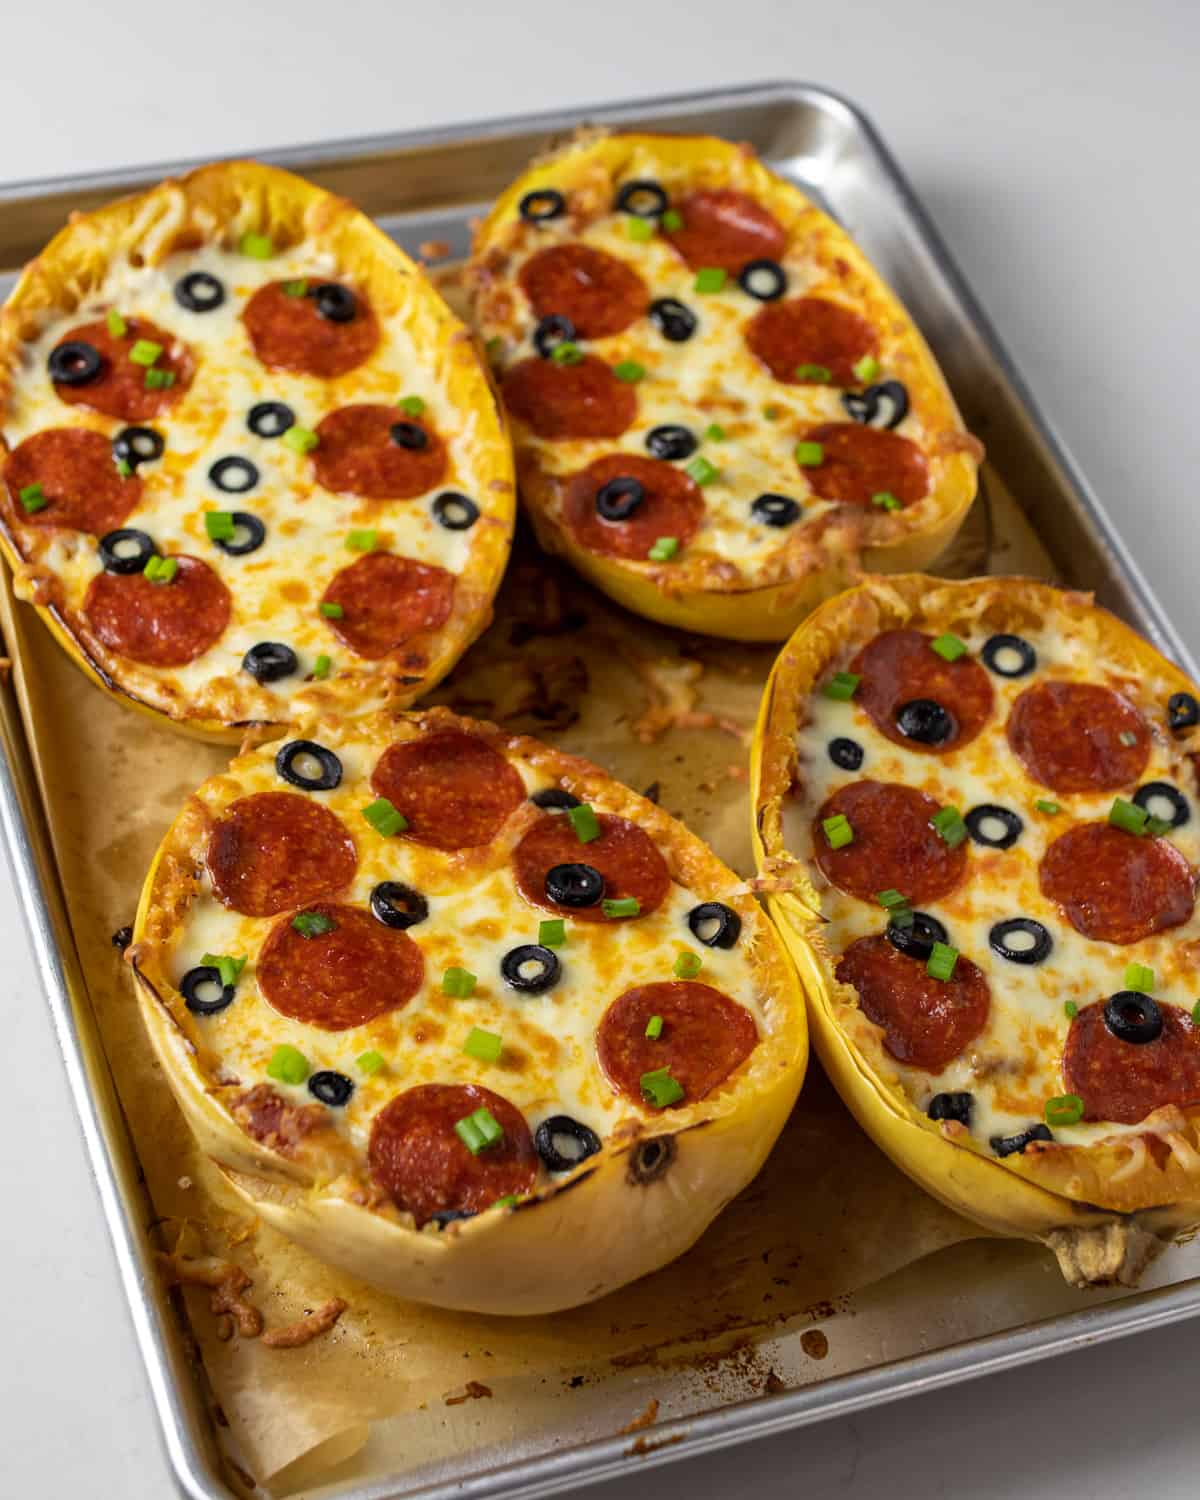 Overhead picture of baked squash with melted cheese and pepperoni.